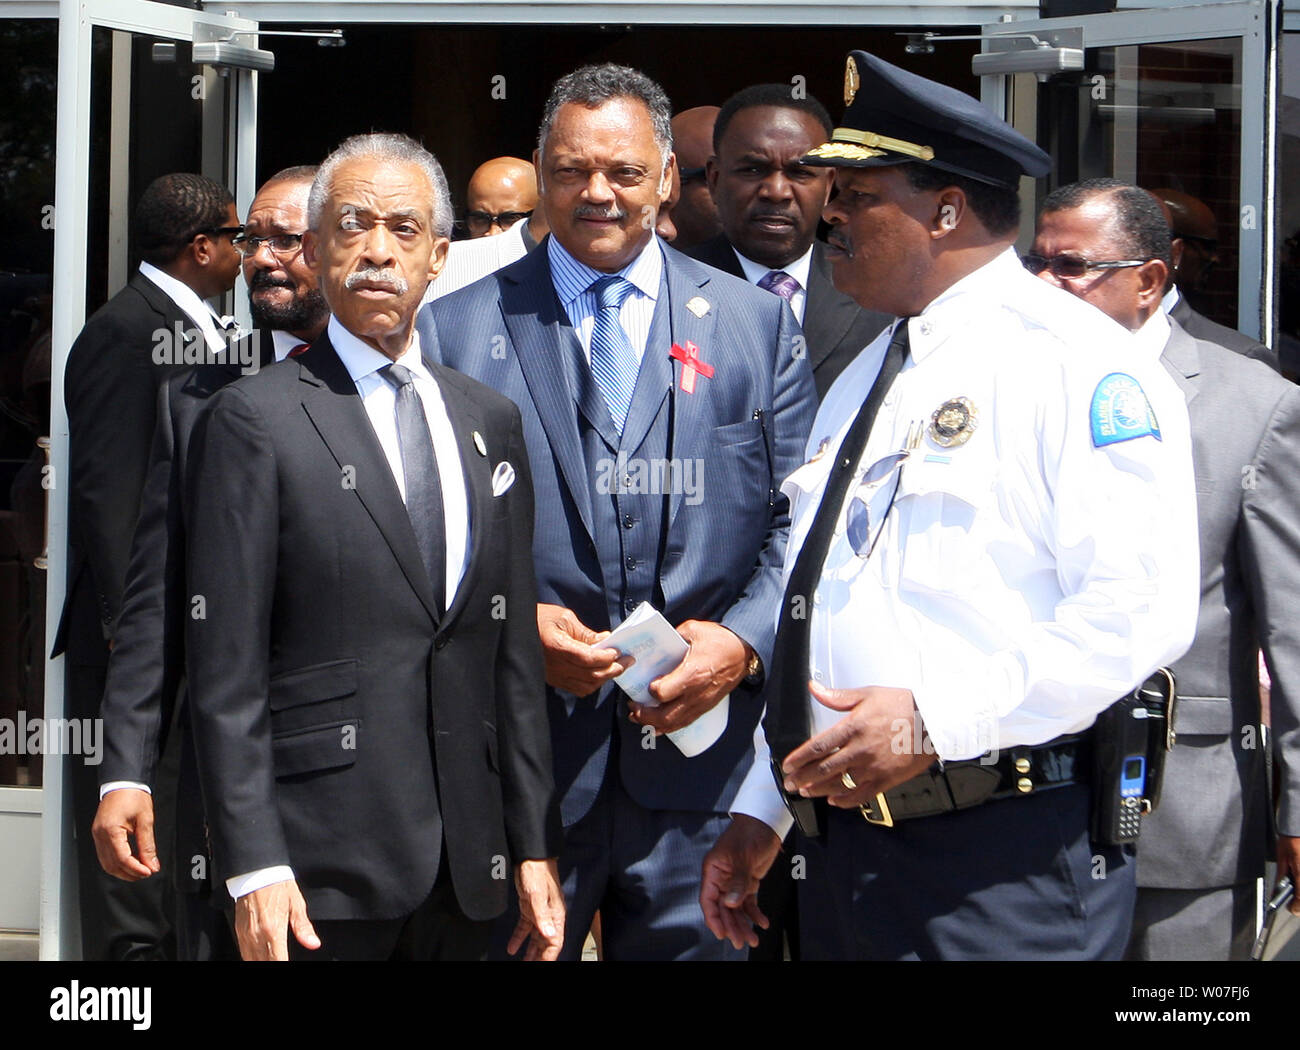 Rev. Jessie Jackson and Rev. Al Sharpton leave the Friendly Temple Missionary Baptist Church at the completion of the funeral for Michael Brown Jr. in St. Louis on August 25, 2014. Brown gained attention after was shot by a white Ferguson, Missouri police officer on August 9 and was unarmed. The shooting led to several nights of looting, arrests and heavy police presence.   UPI/Bill Greenblatt Stock Photo